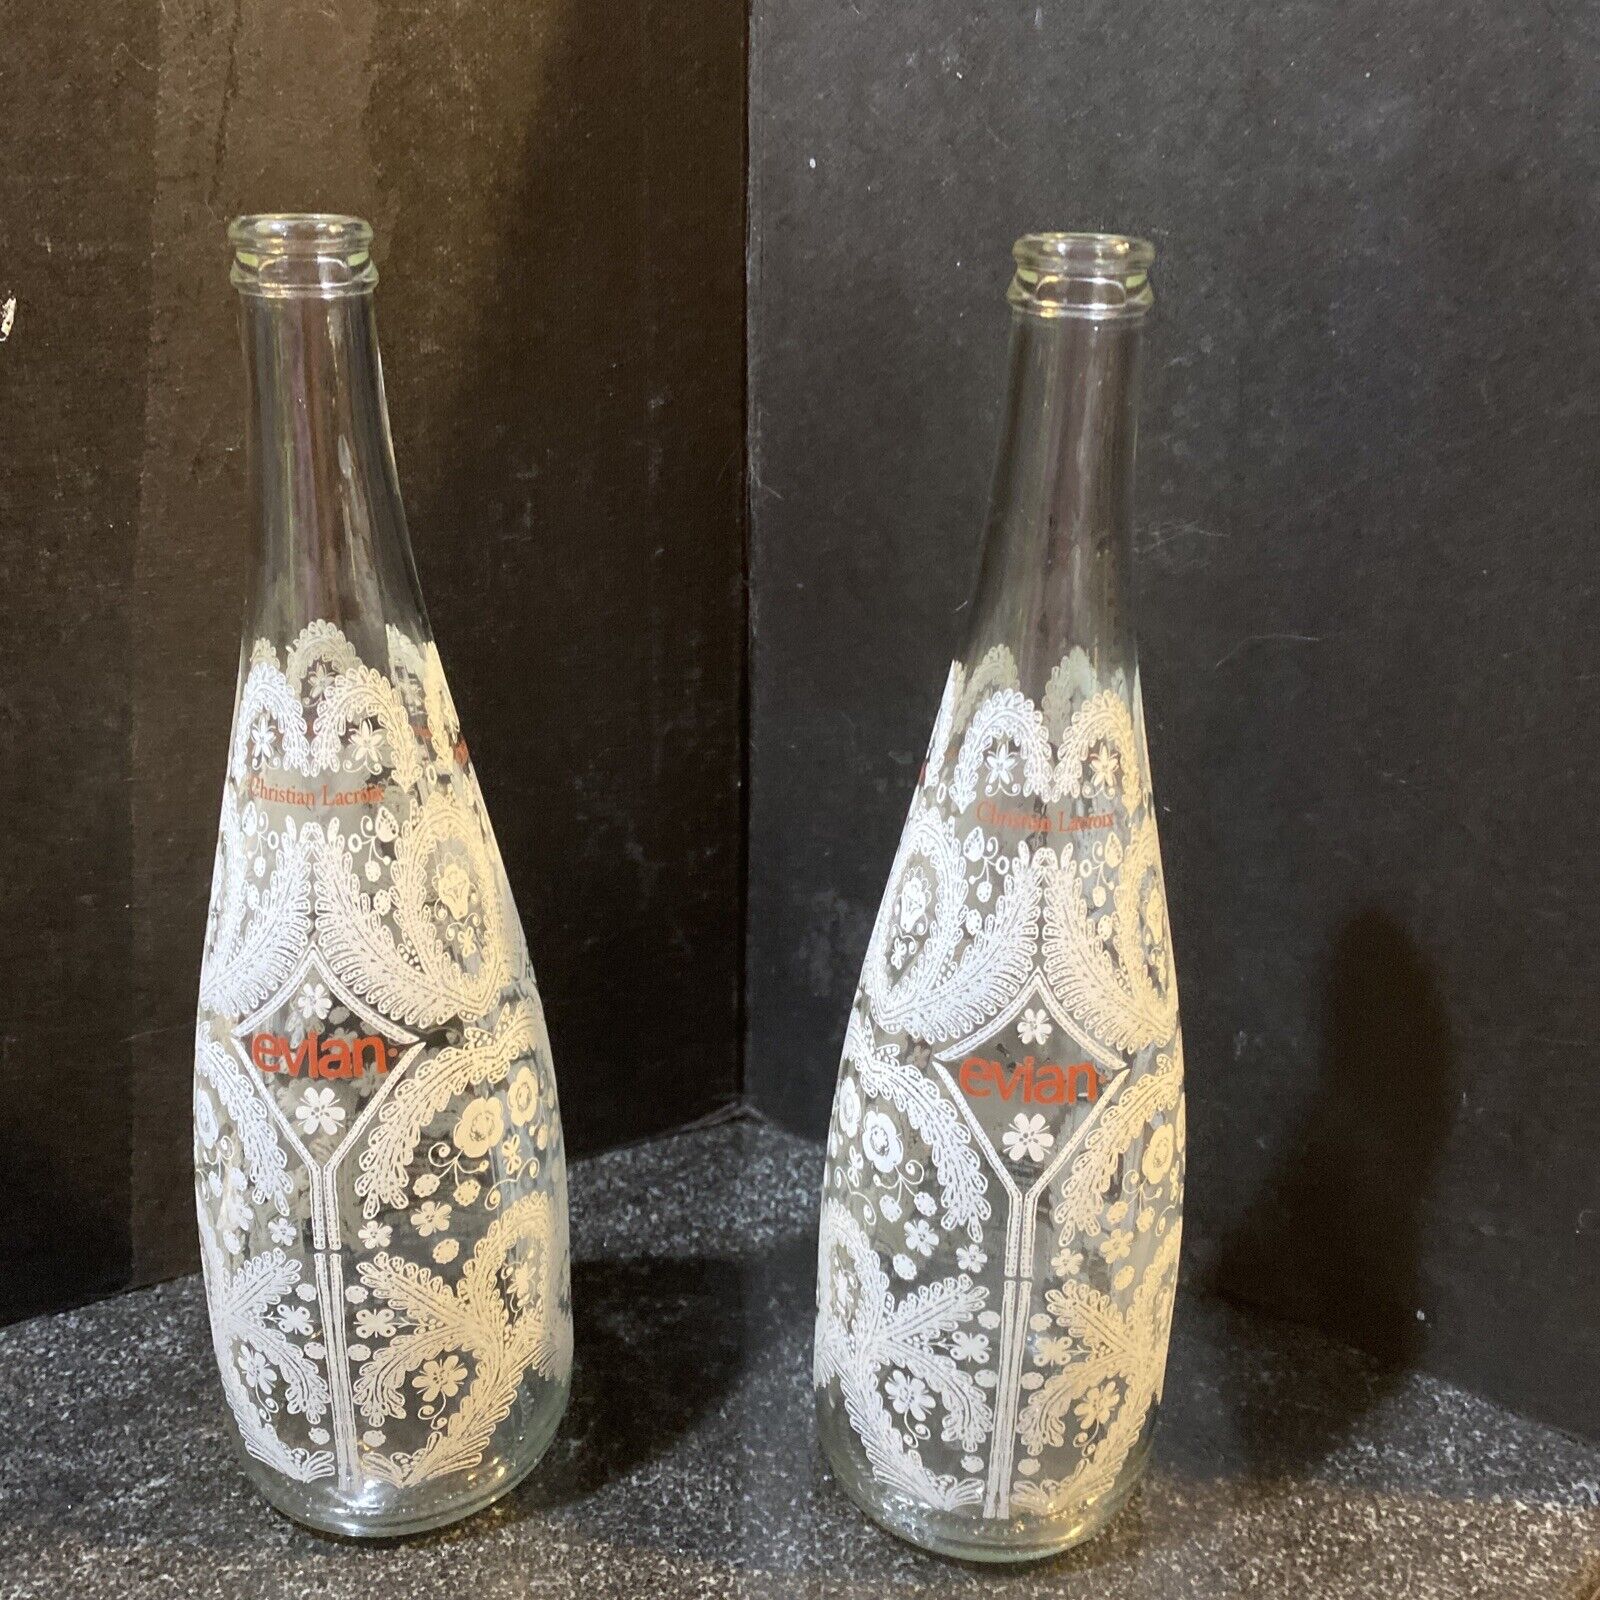 Two 2008 Evian Christian Lacroix Lace Snowflake Glass Water Bottles